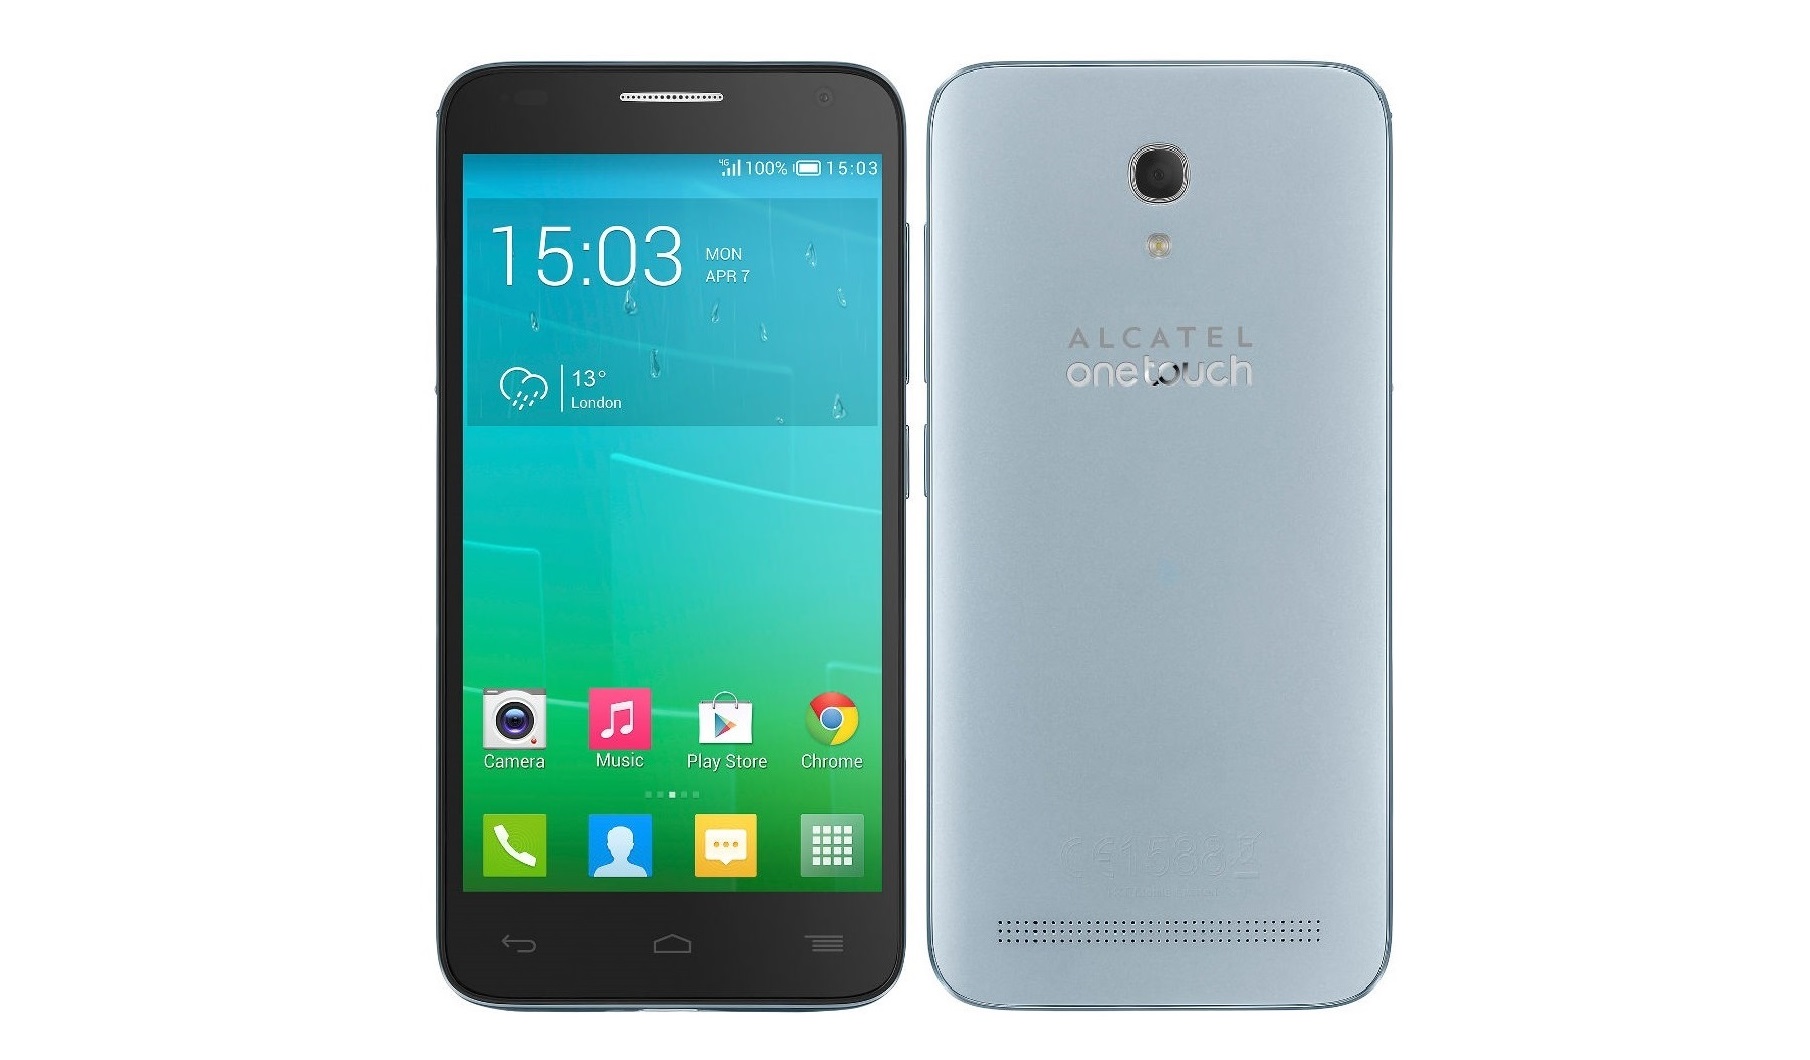 Uninstall Magisk and Unroot your Alcatel Idol 2 Mini